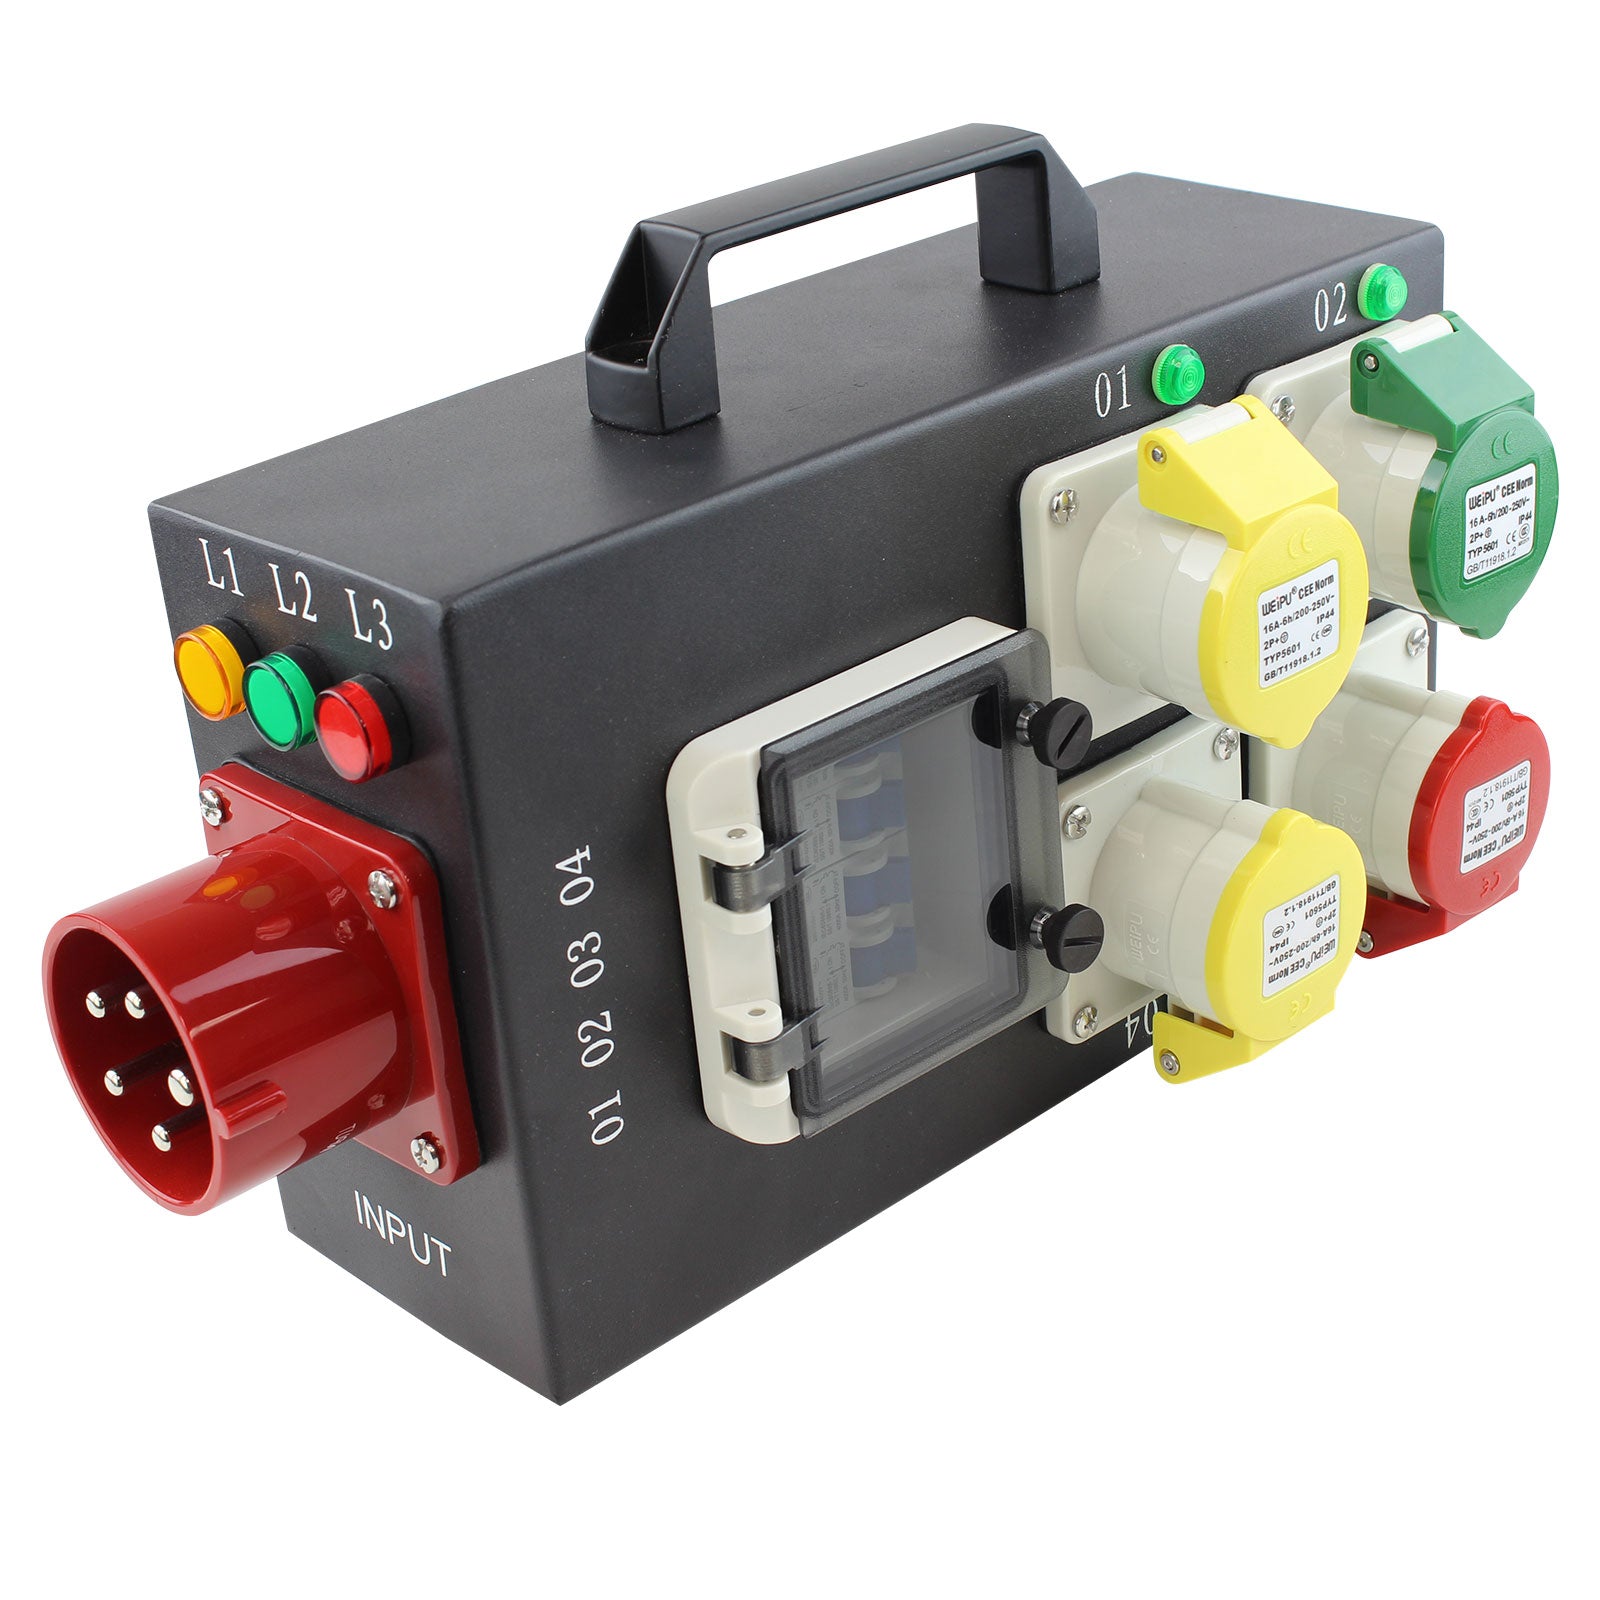 Blastking VPB-110  1 In 4 Out Distribution Box with Camlock Fittings 110V